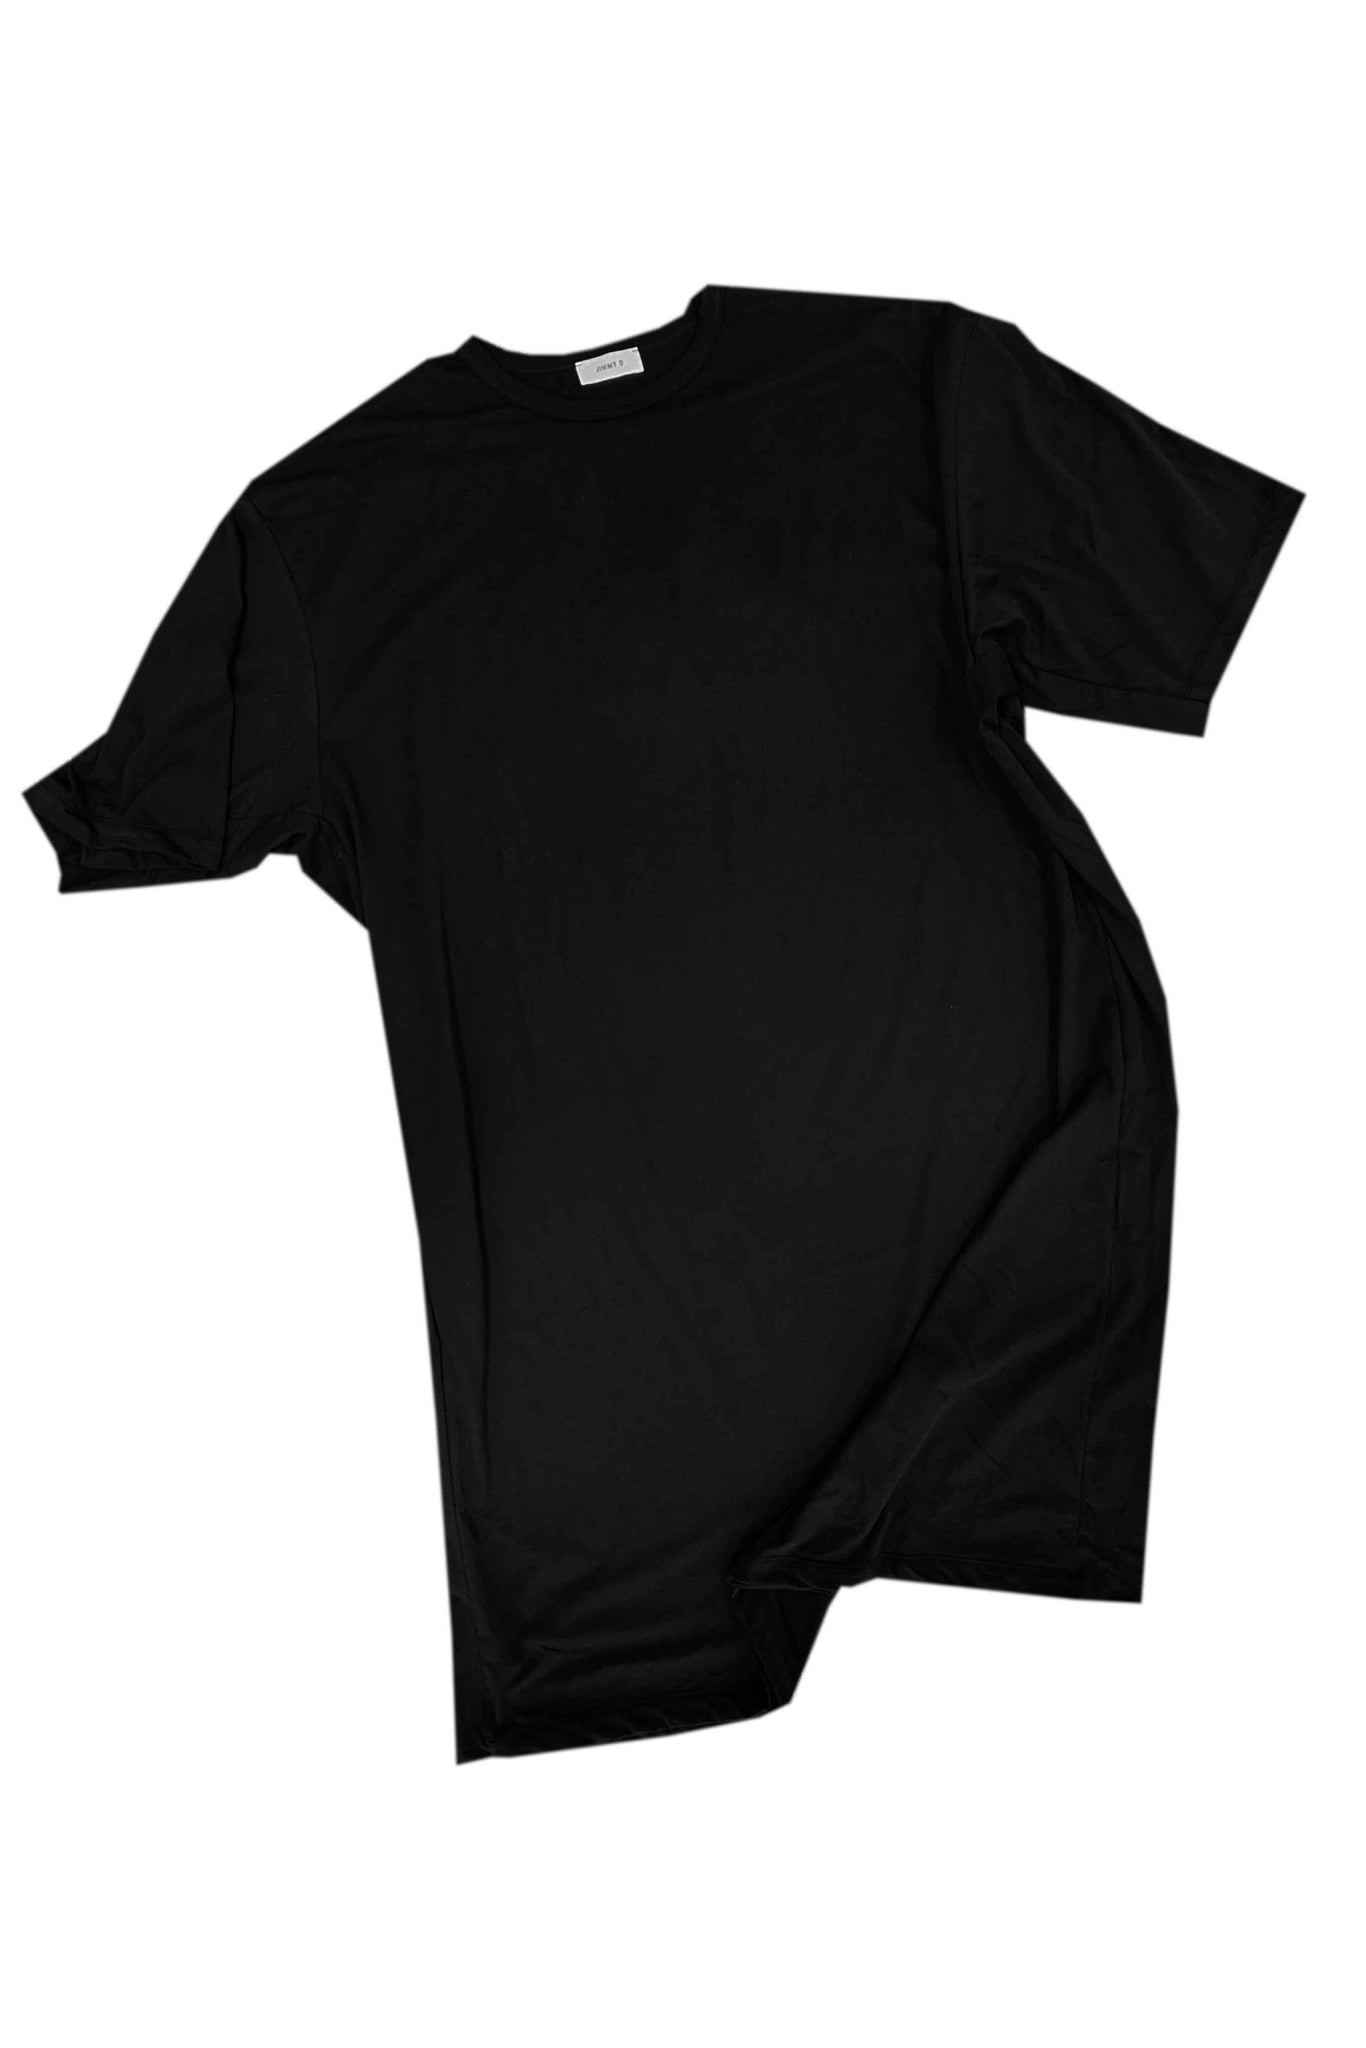 Space & Time Tee | Cotton | Black